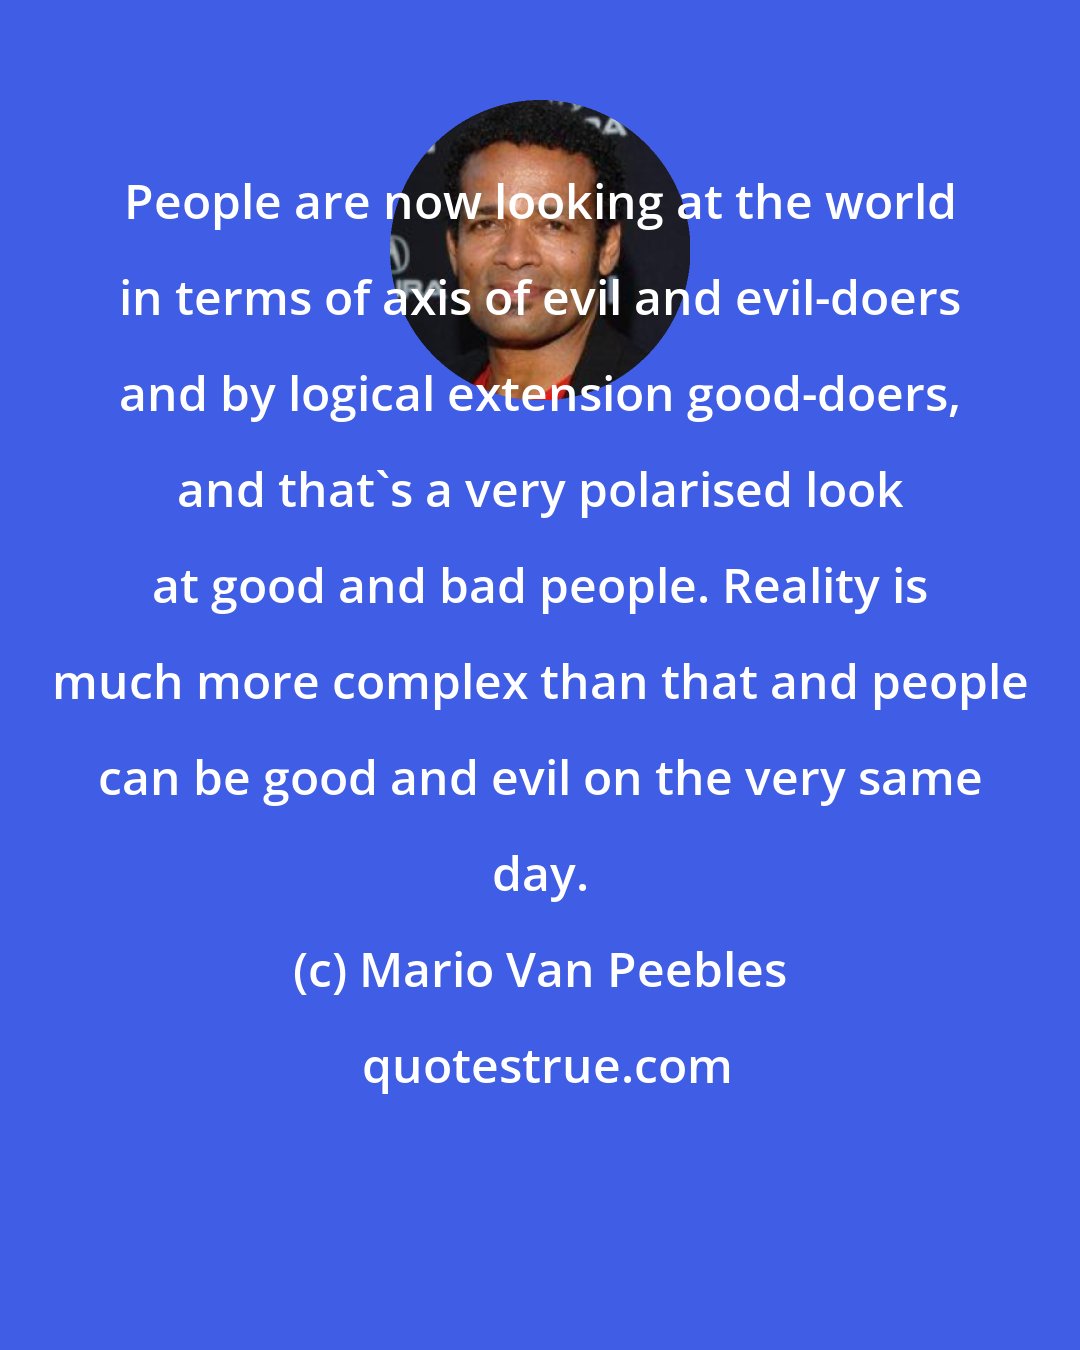 Mario Van Peebles: People are now looking at the world in terms of axis of evil and evil-doers and by logical extension good-doers, and that's a very polarised look at good and bad people. Reality is much more complex than that and people can be good and evil on the very same day.